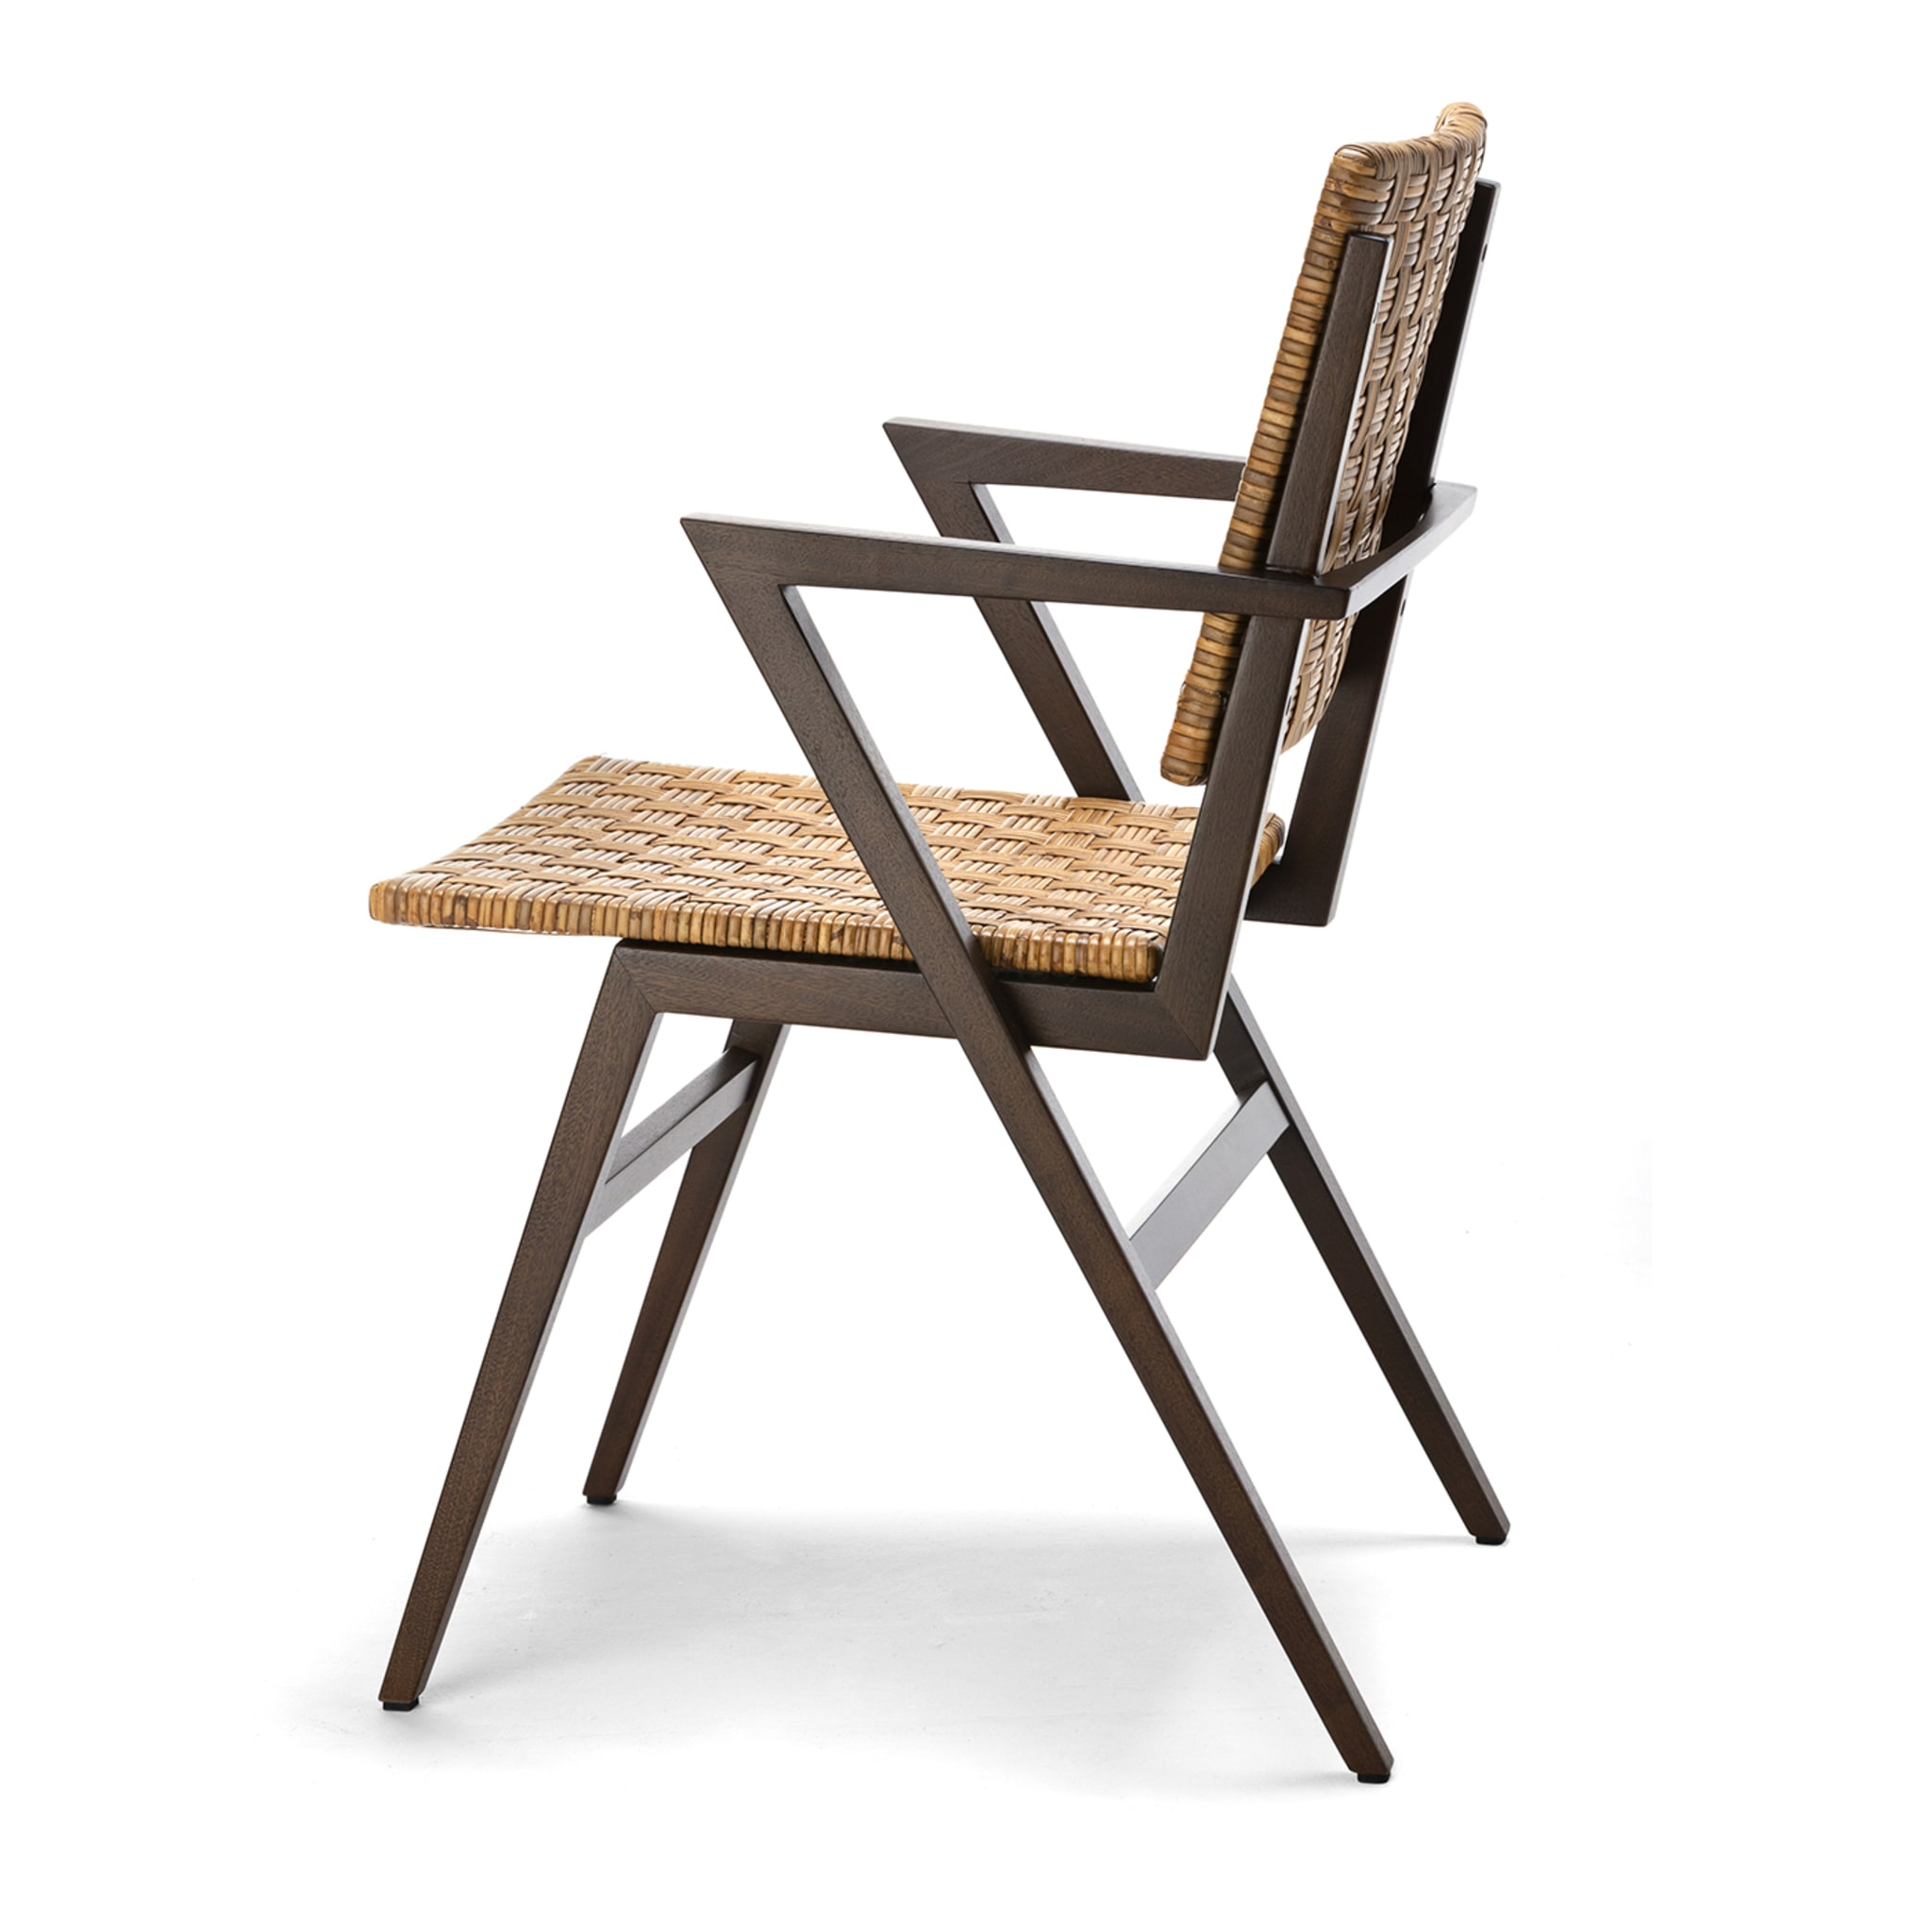 Lupo 1945 Chair by Franco Albini - Alternative view 1